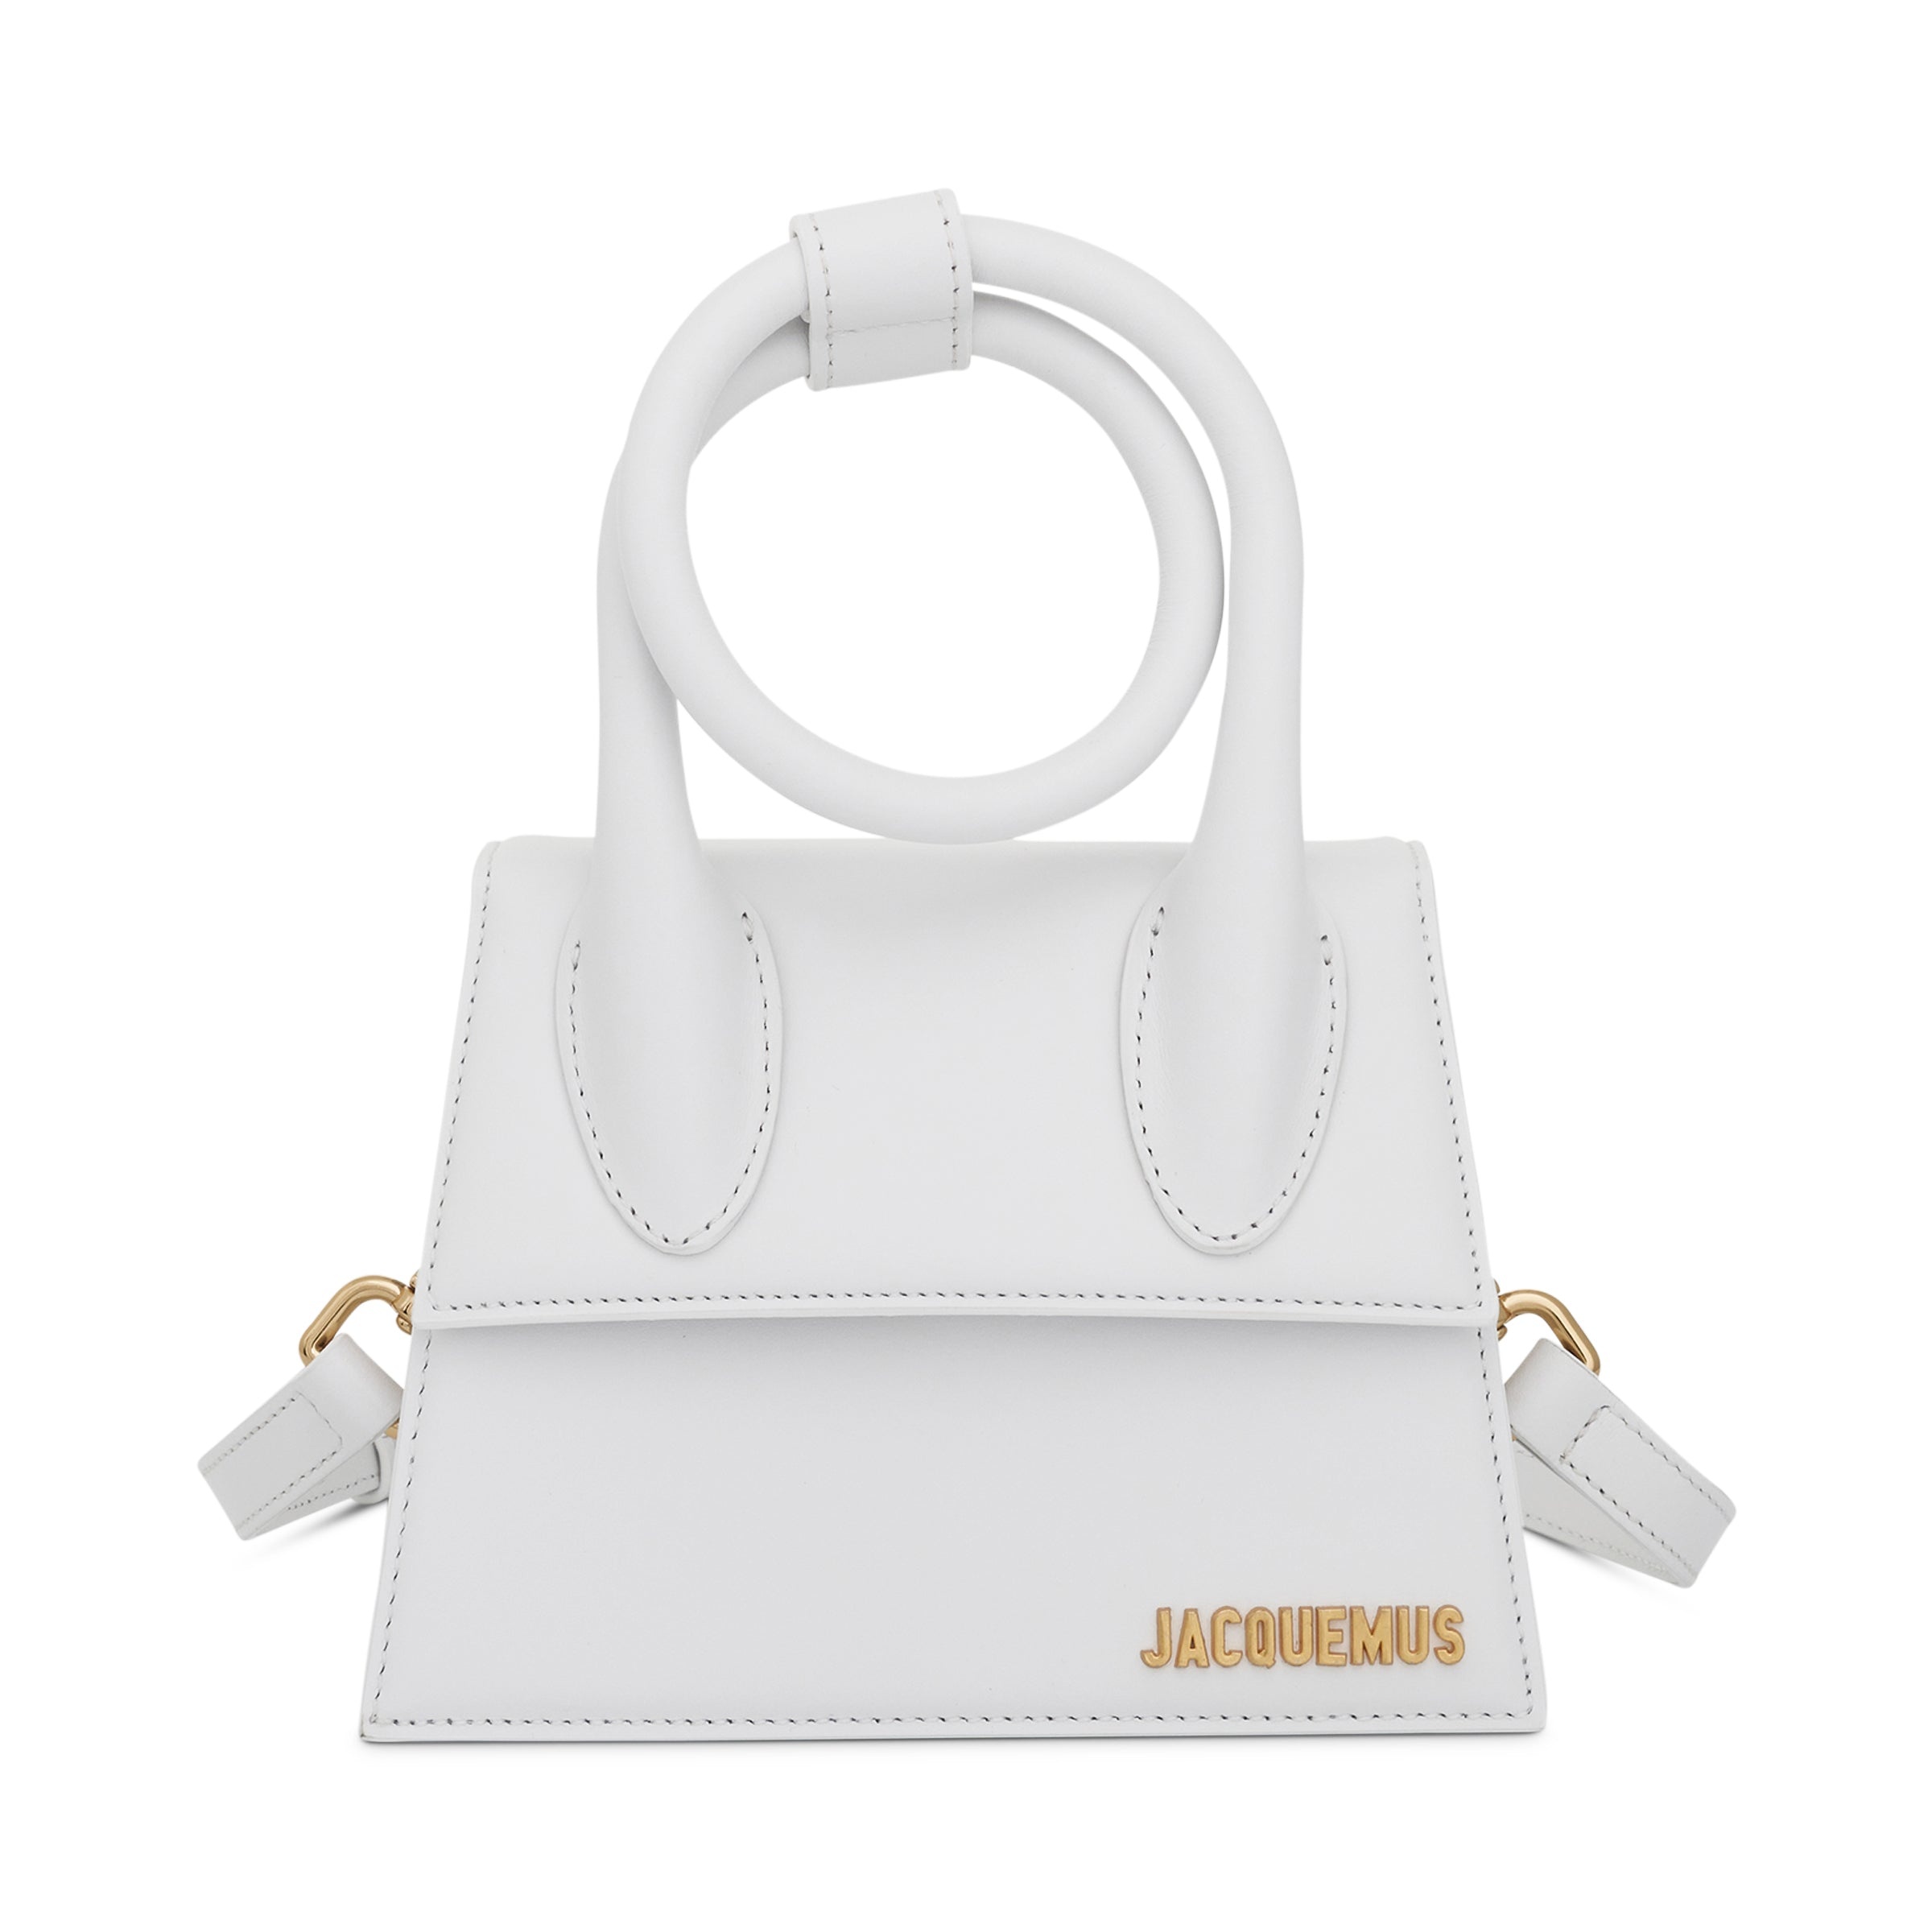 Le Chiquito Noeud Leather Bag in White - 1